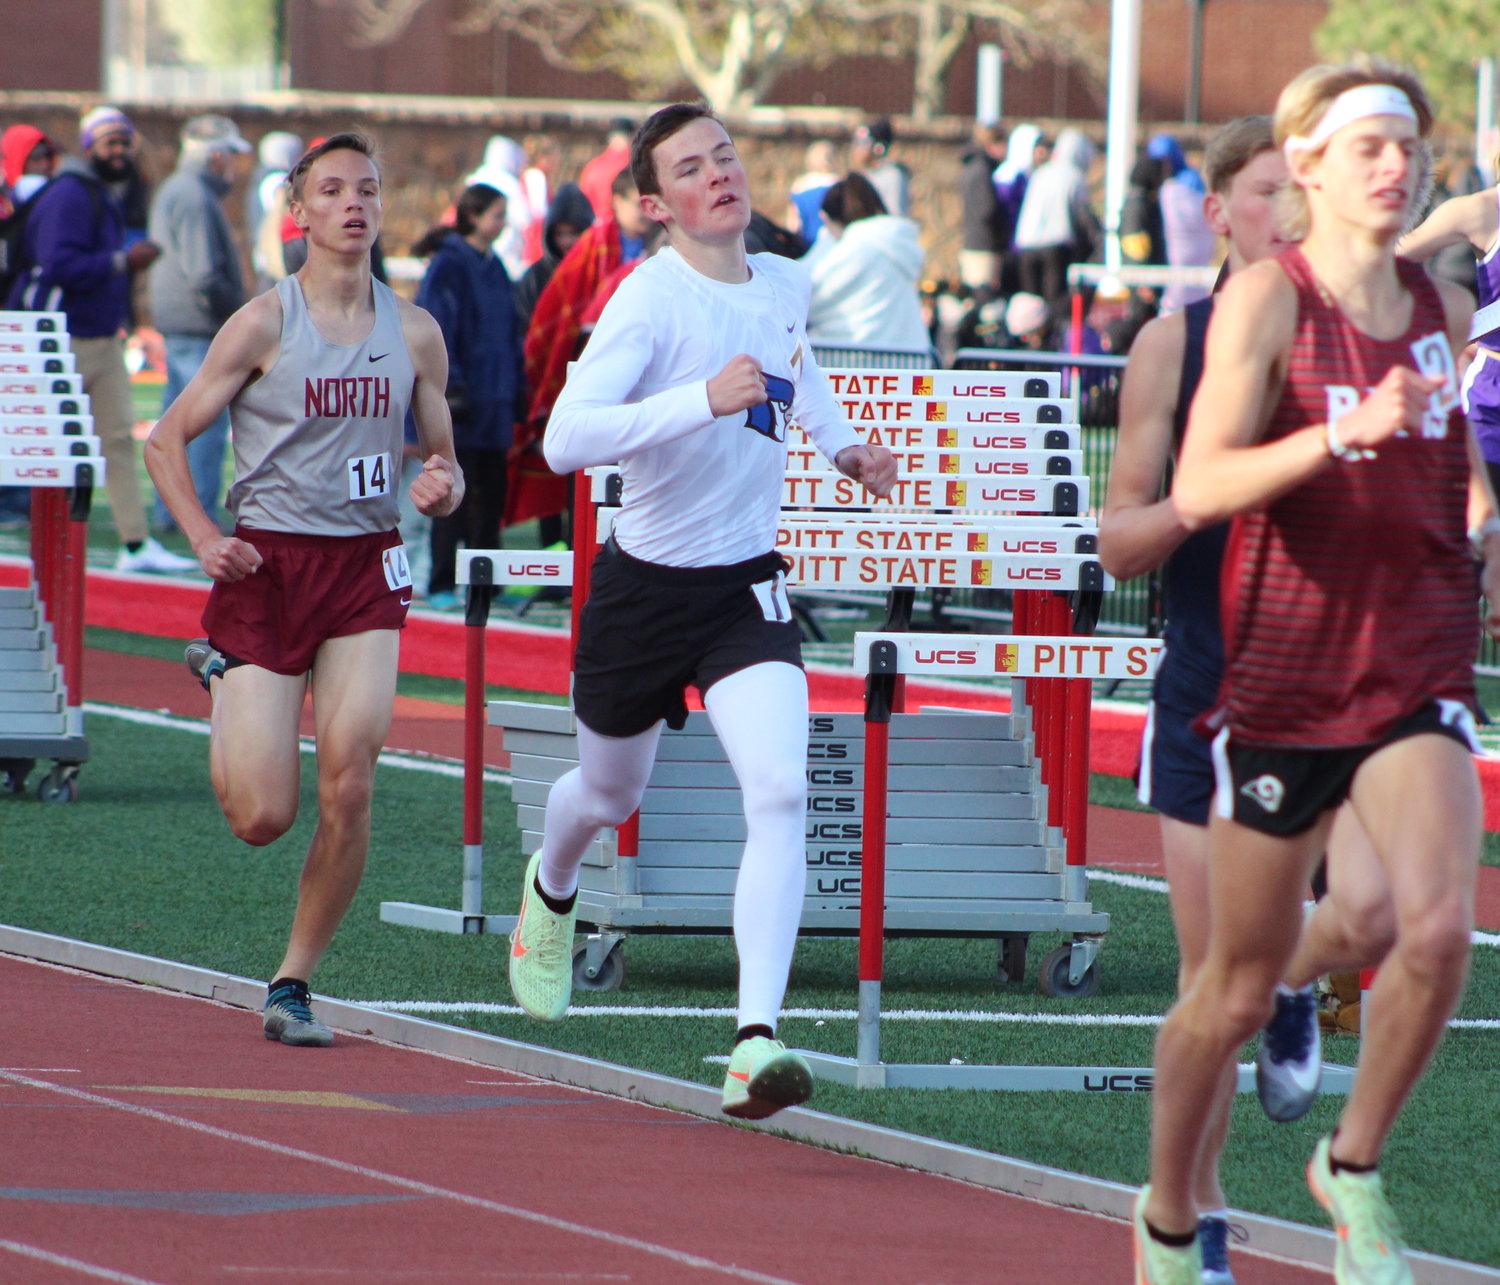 Sophomore Zach Mitchell’s dedication to the sport was evident in both his races on April 8. Mitchell PR’d and smashed a 32 year school record from 1990 in the 3200M race.